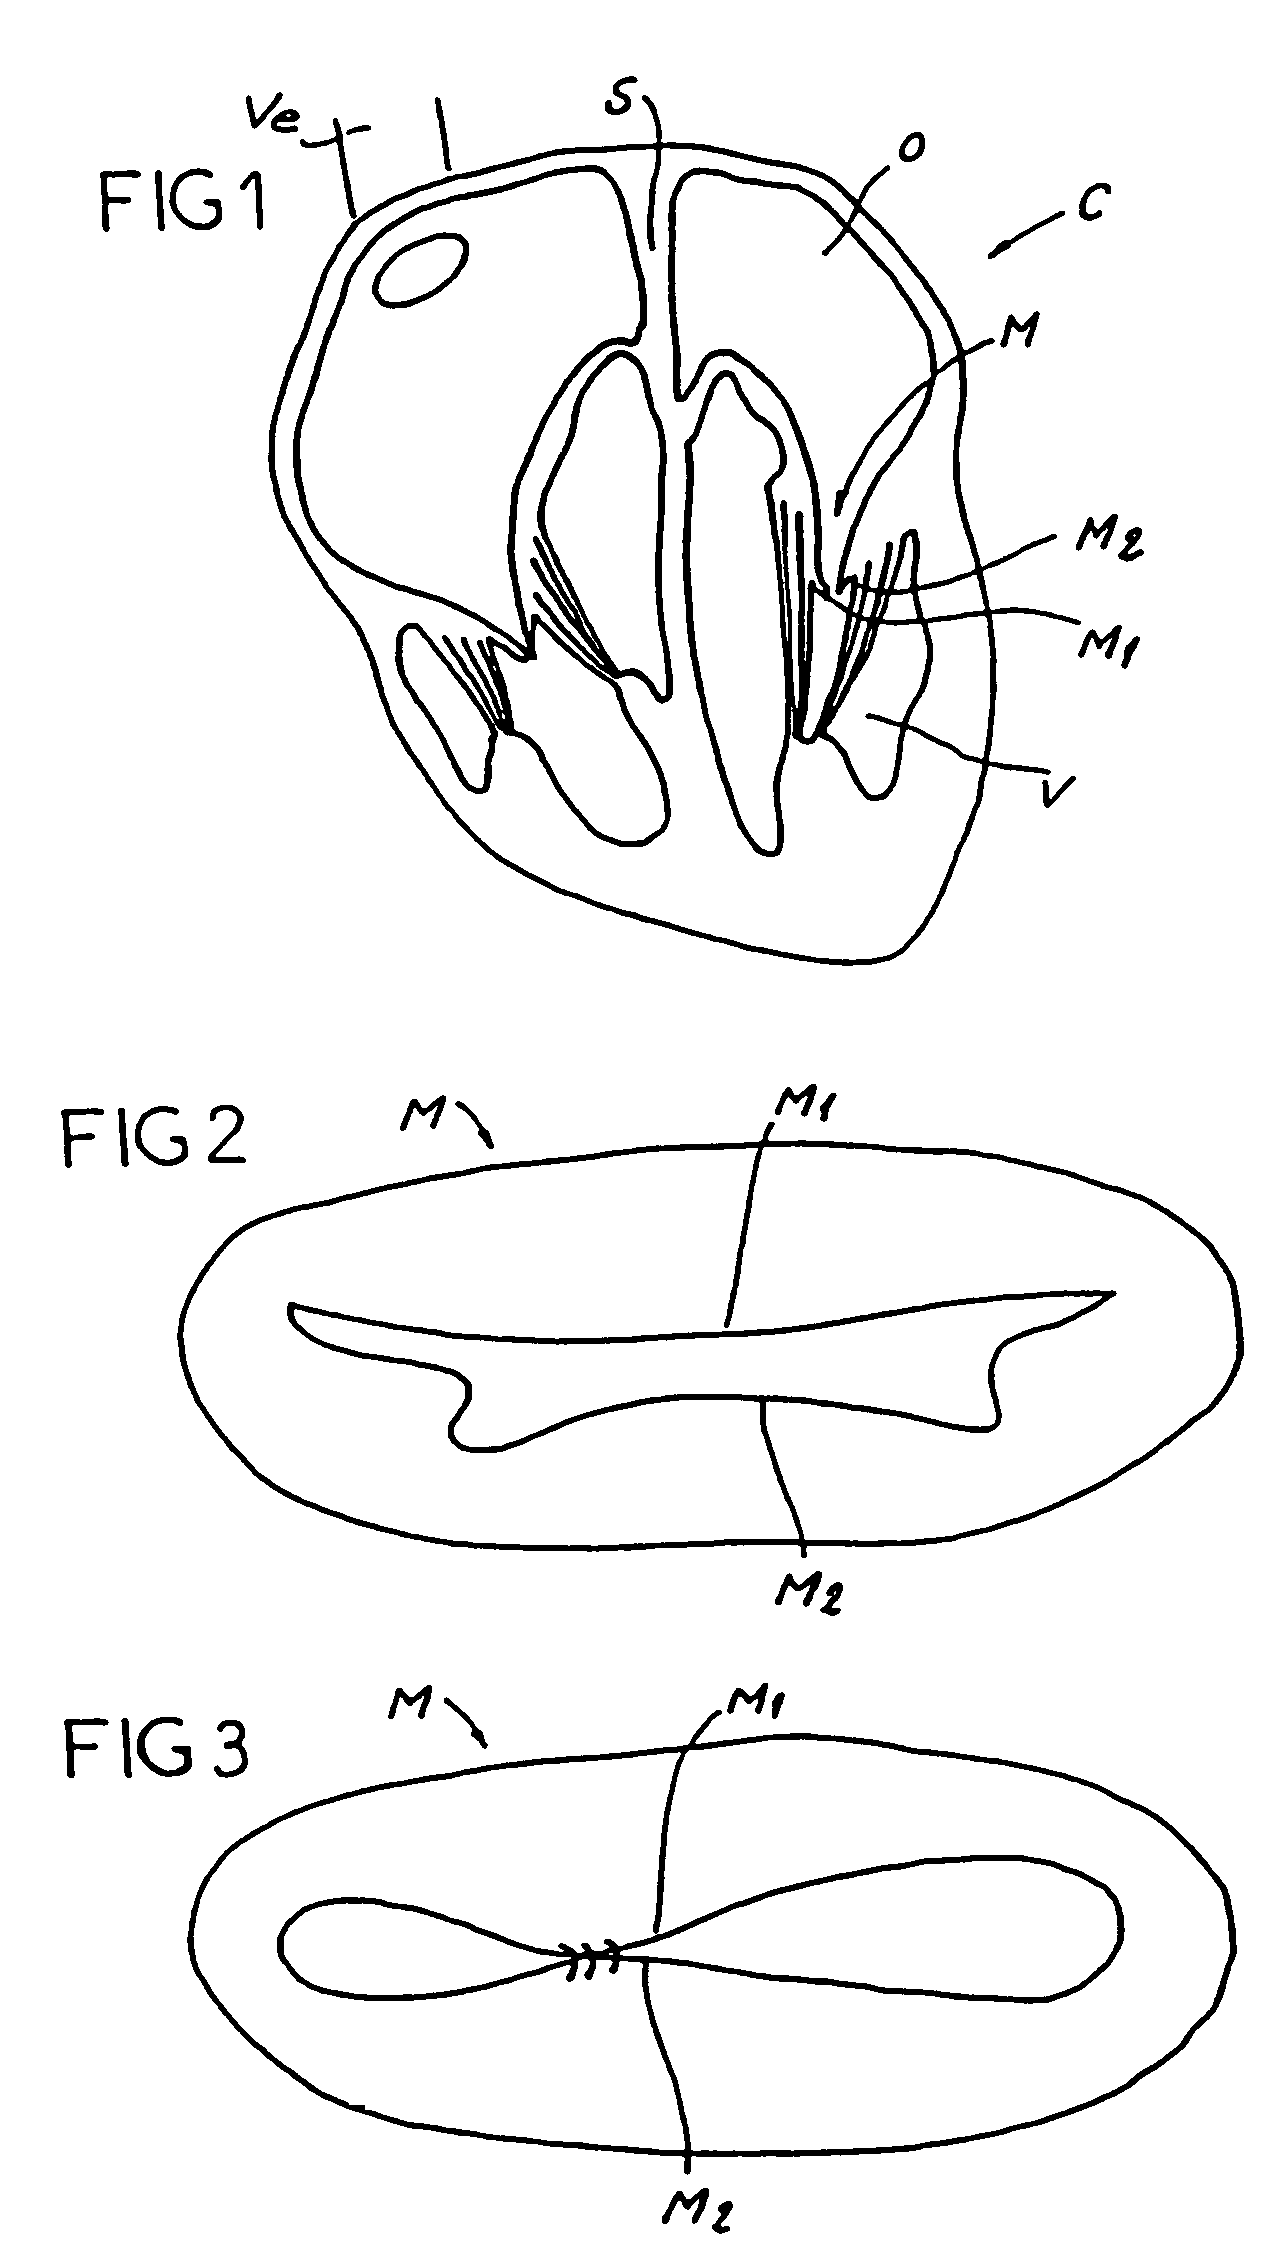 Surgical device for connecting soft tissue